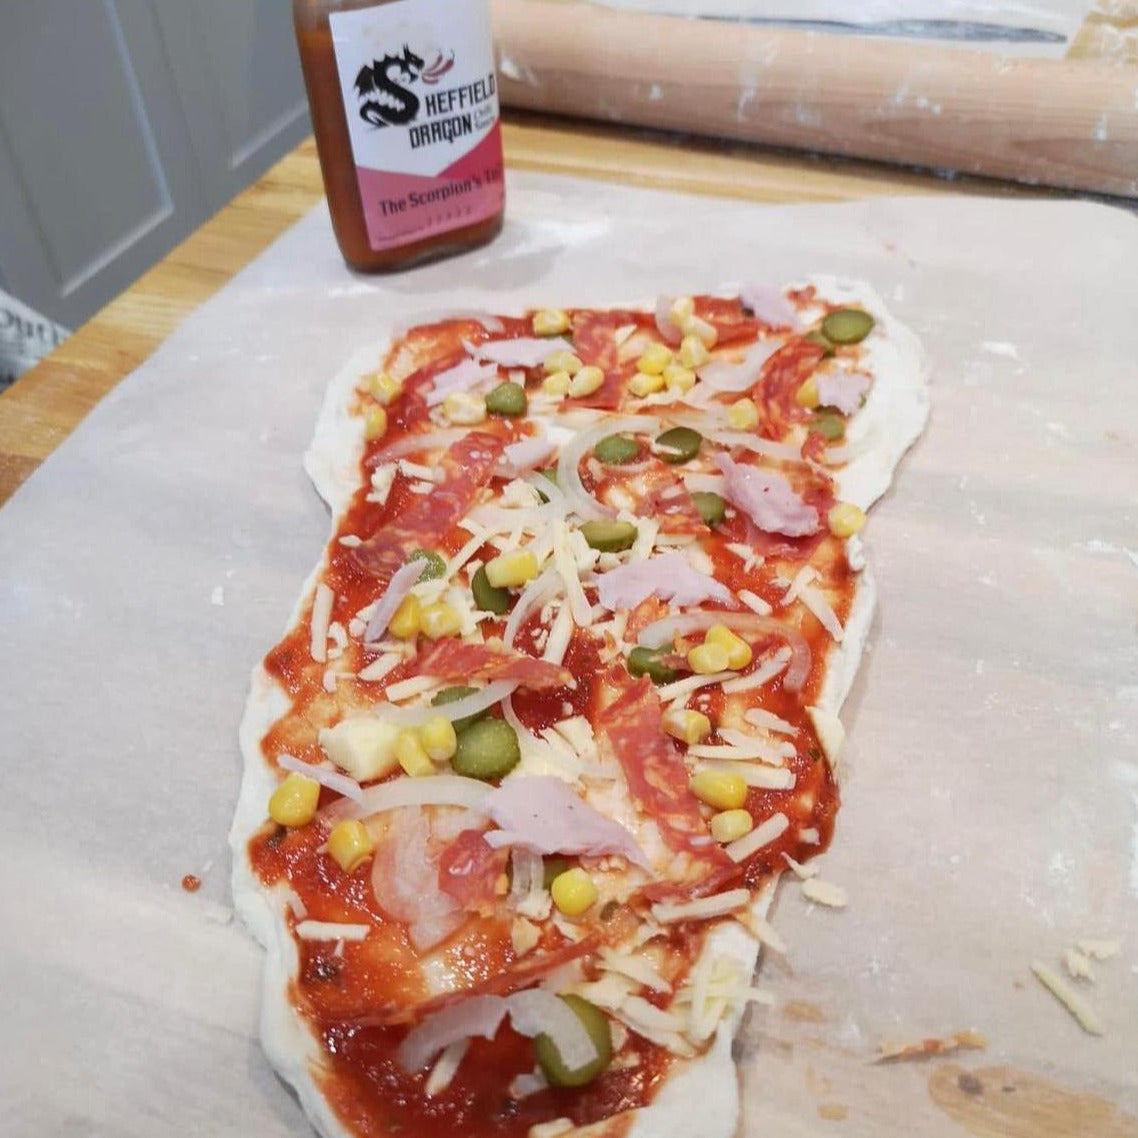 A picture of home made pizza drizzled with The Scorpion's Tale hot sauce